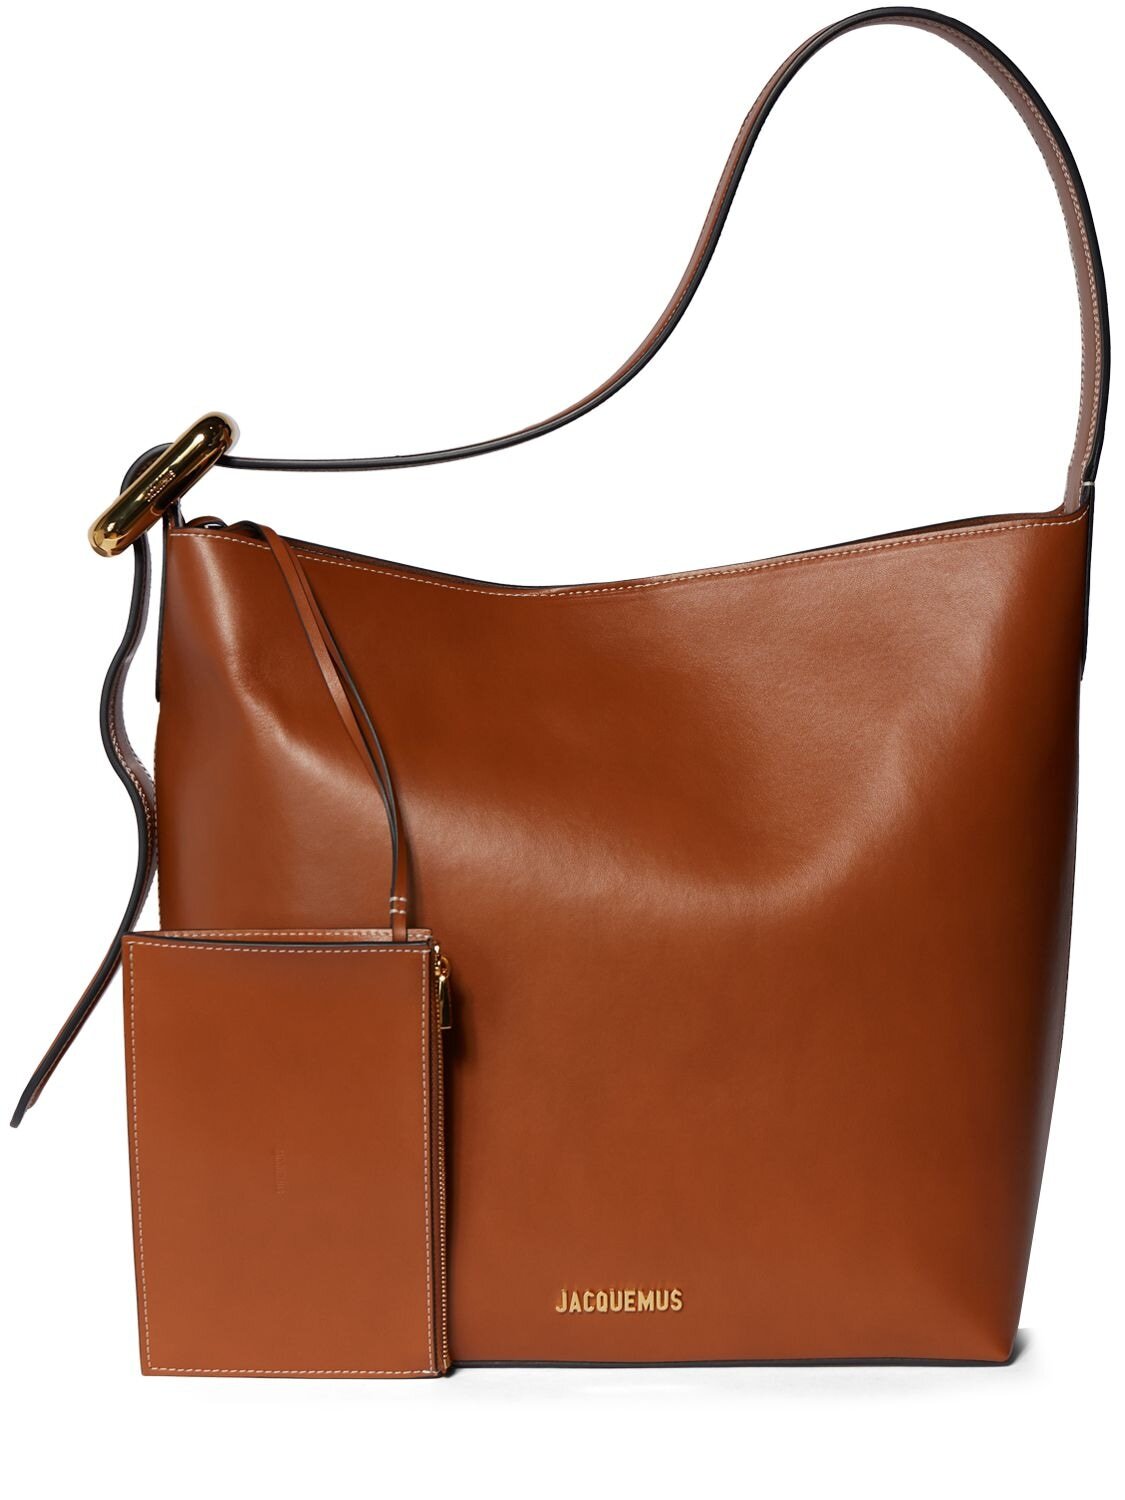 JACQUEMUS Le Regalo Leather Tote Bag in brown